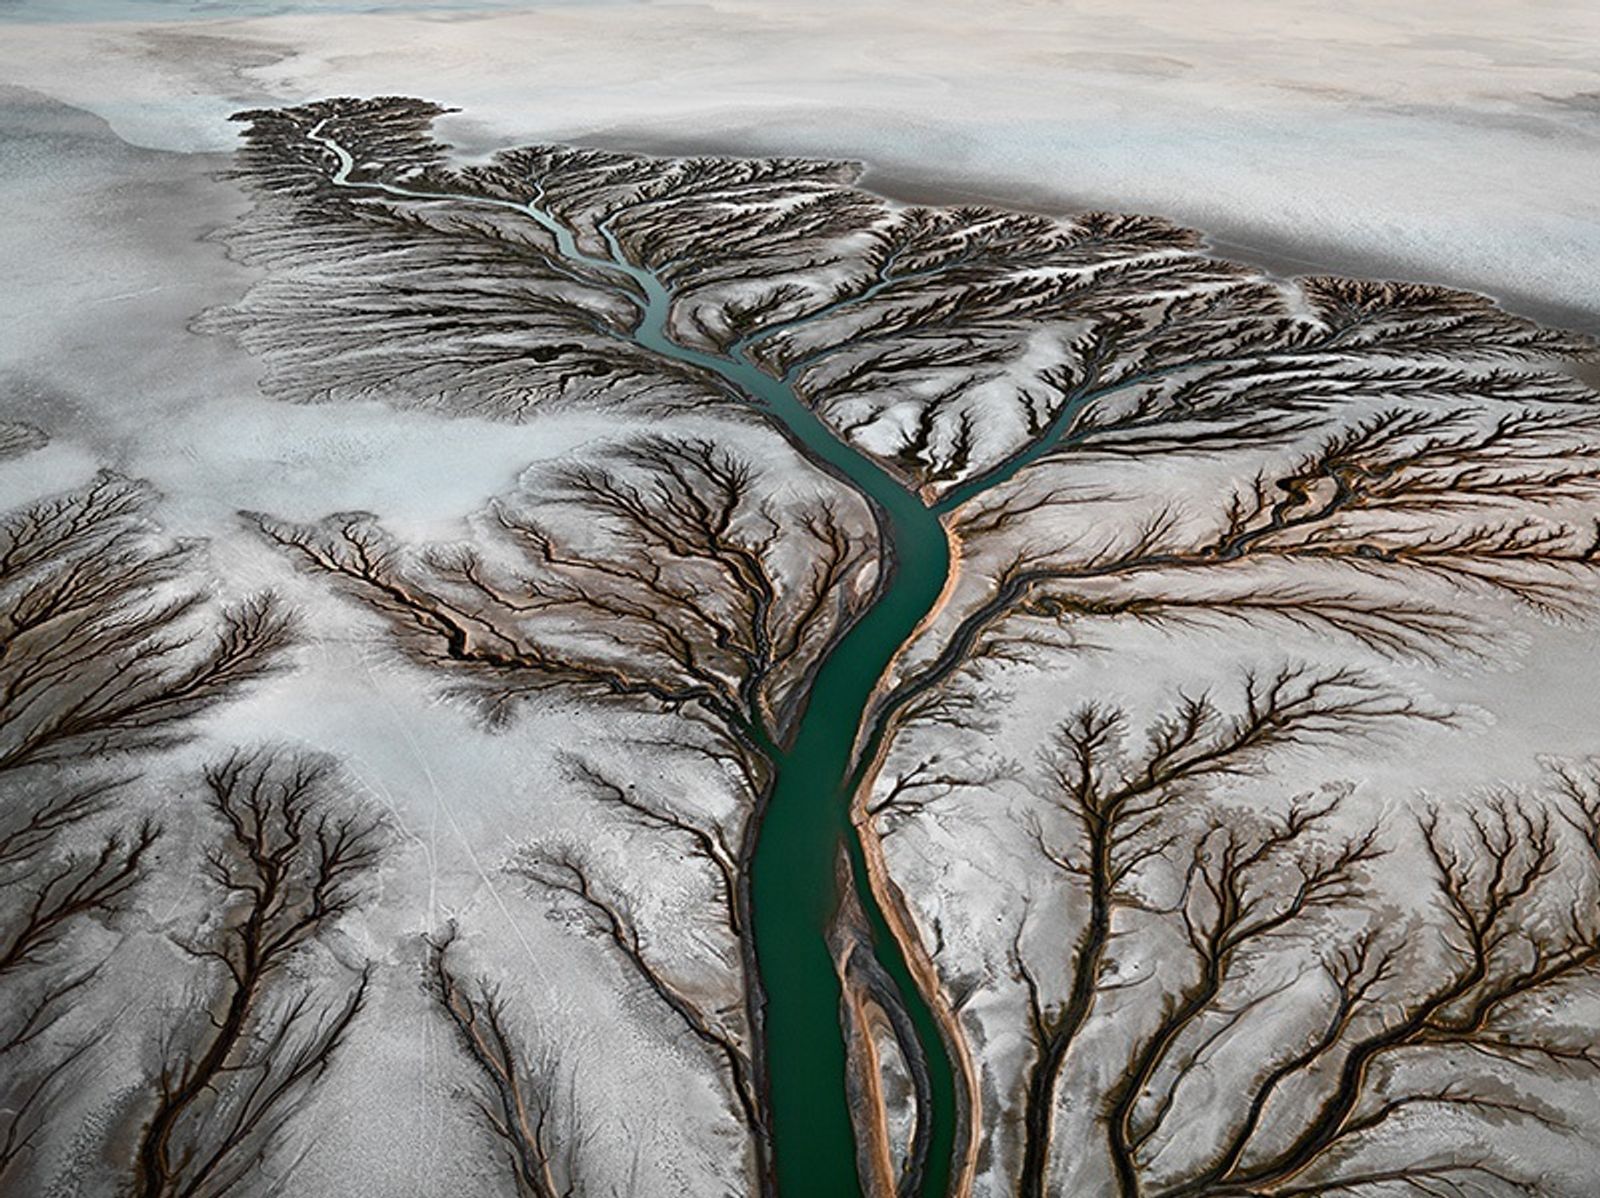 Image from the series Water by © Edward Burtynsky